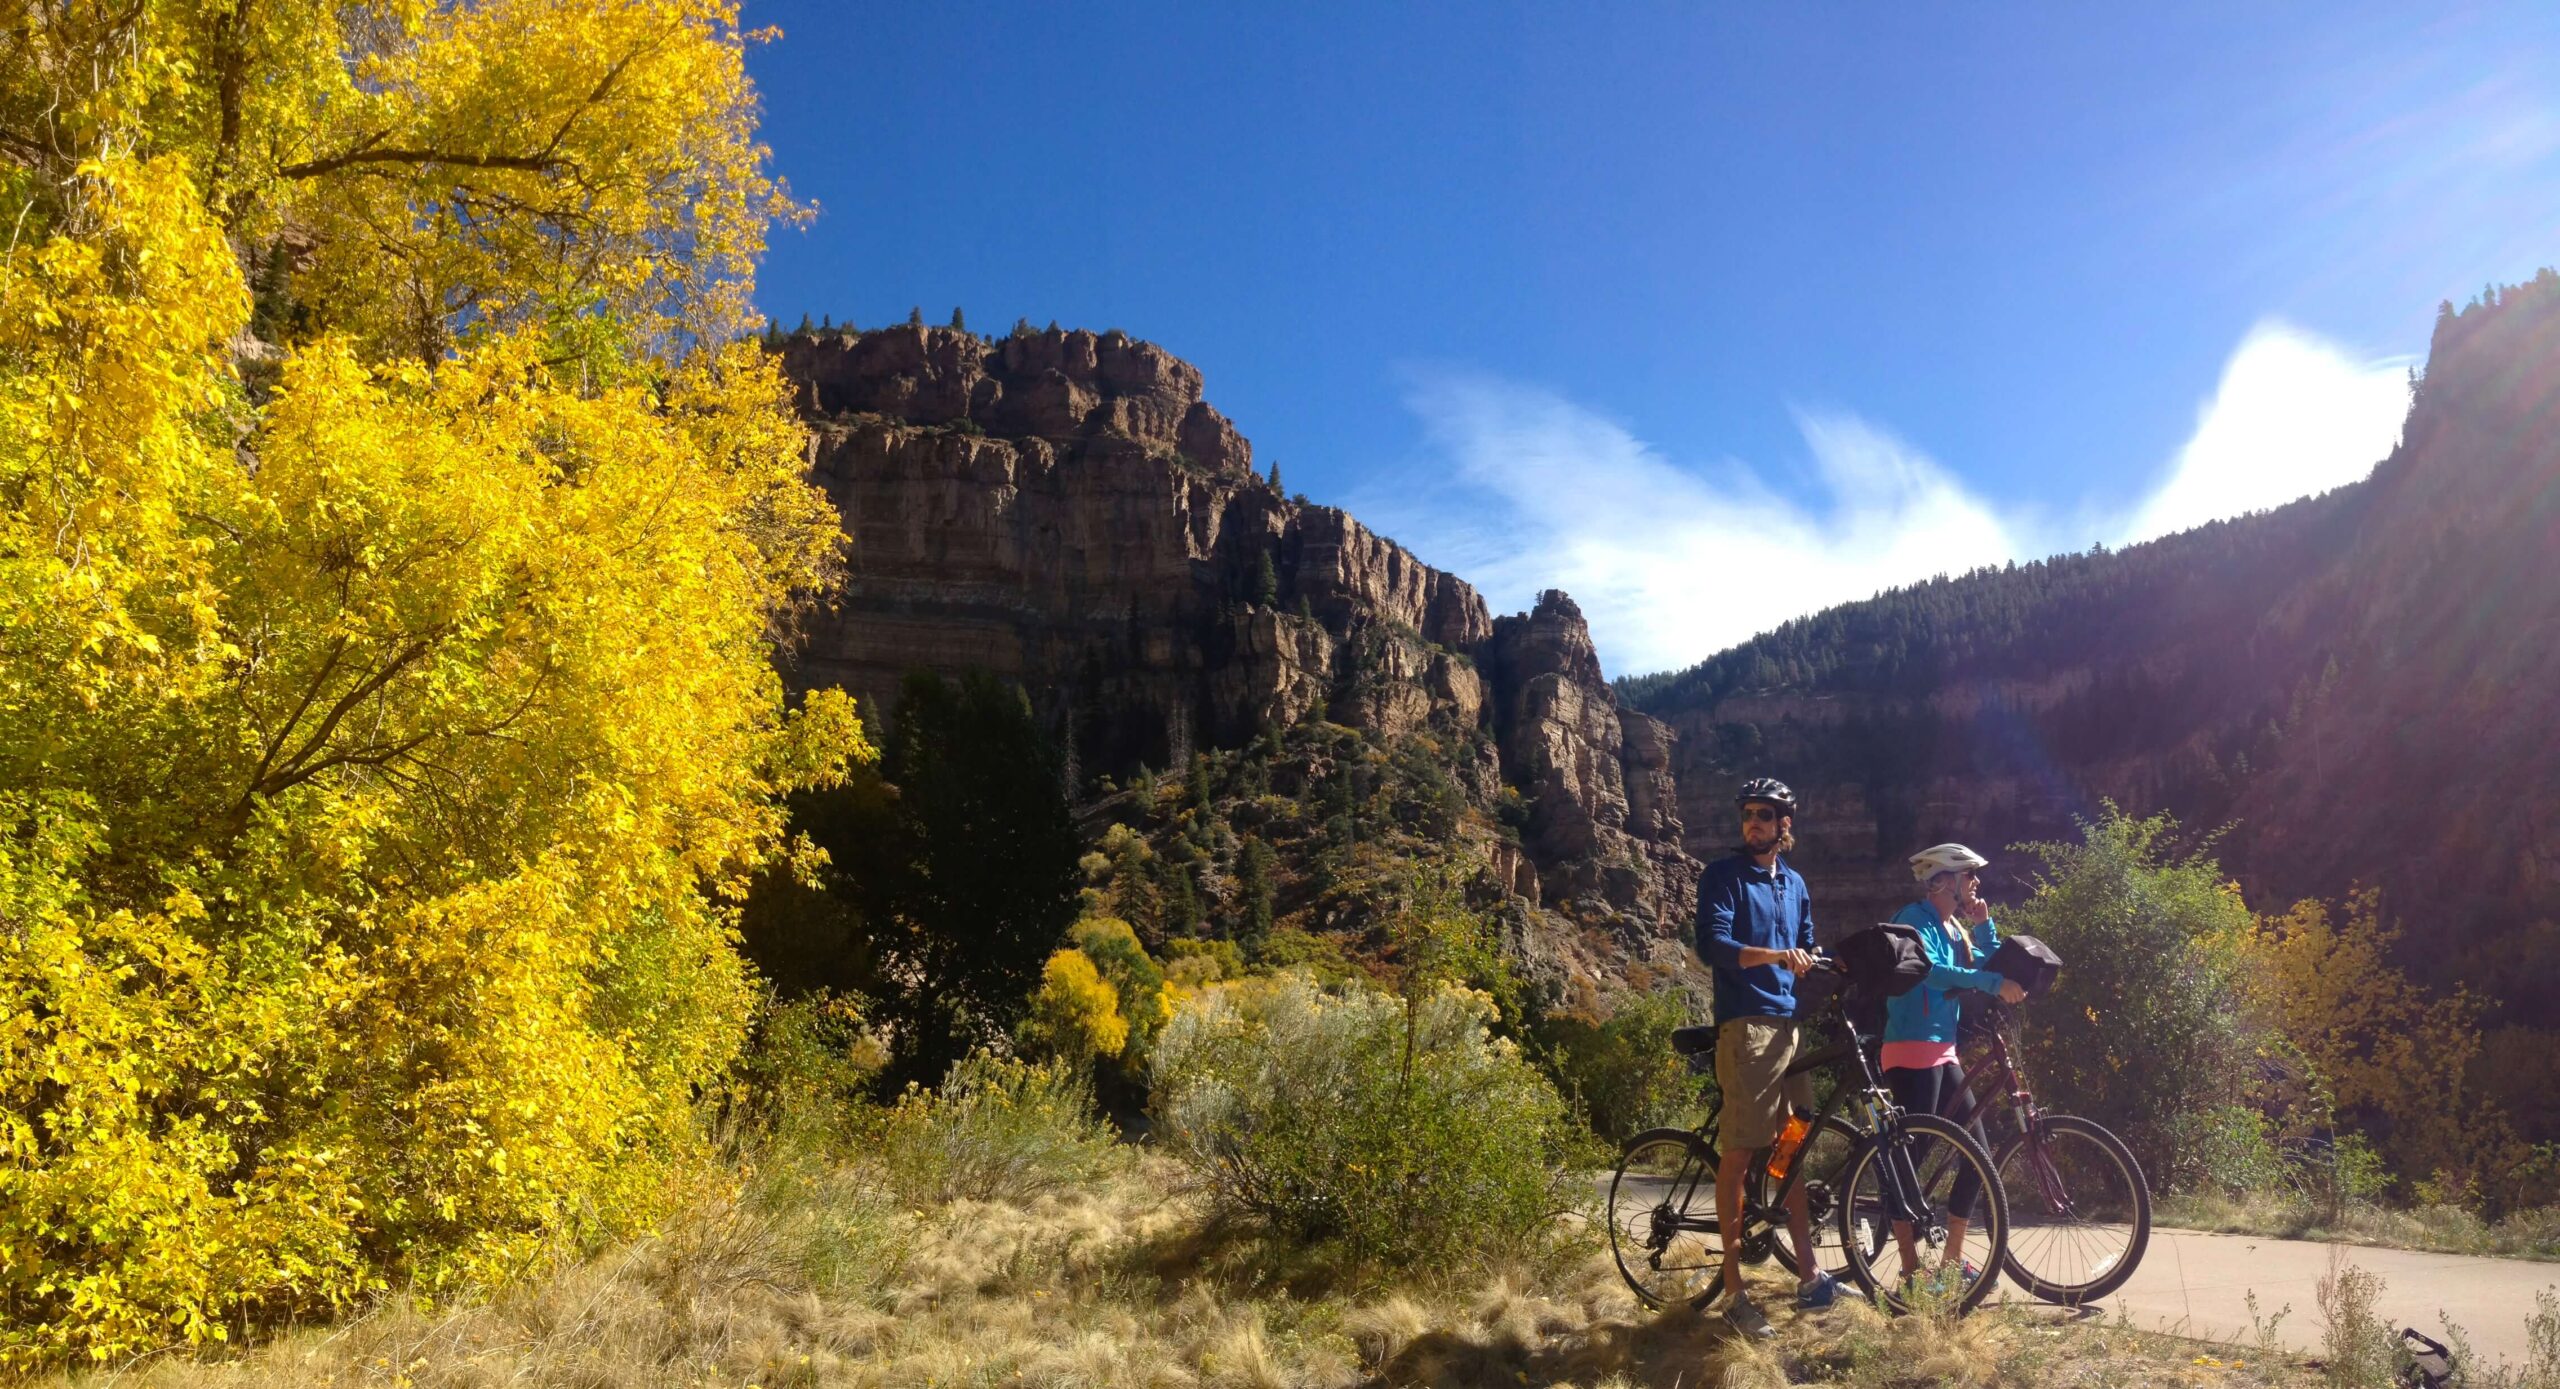 This image features two bikers taking a pause on the Glenwood Canyon Trail. Enveloped by the breathtaking surroundings, they appear to be immersed in the scenic beauty. The trees showcase vibrant fall foliage, harmonizing with the rugged rocky canyon walls.